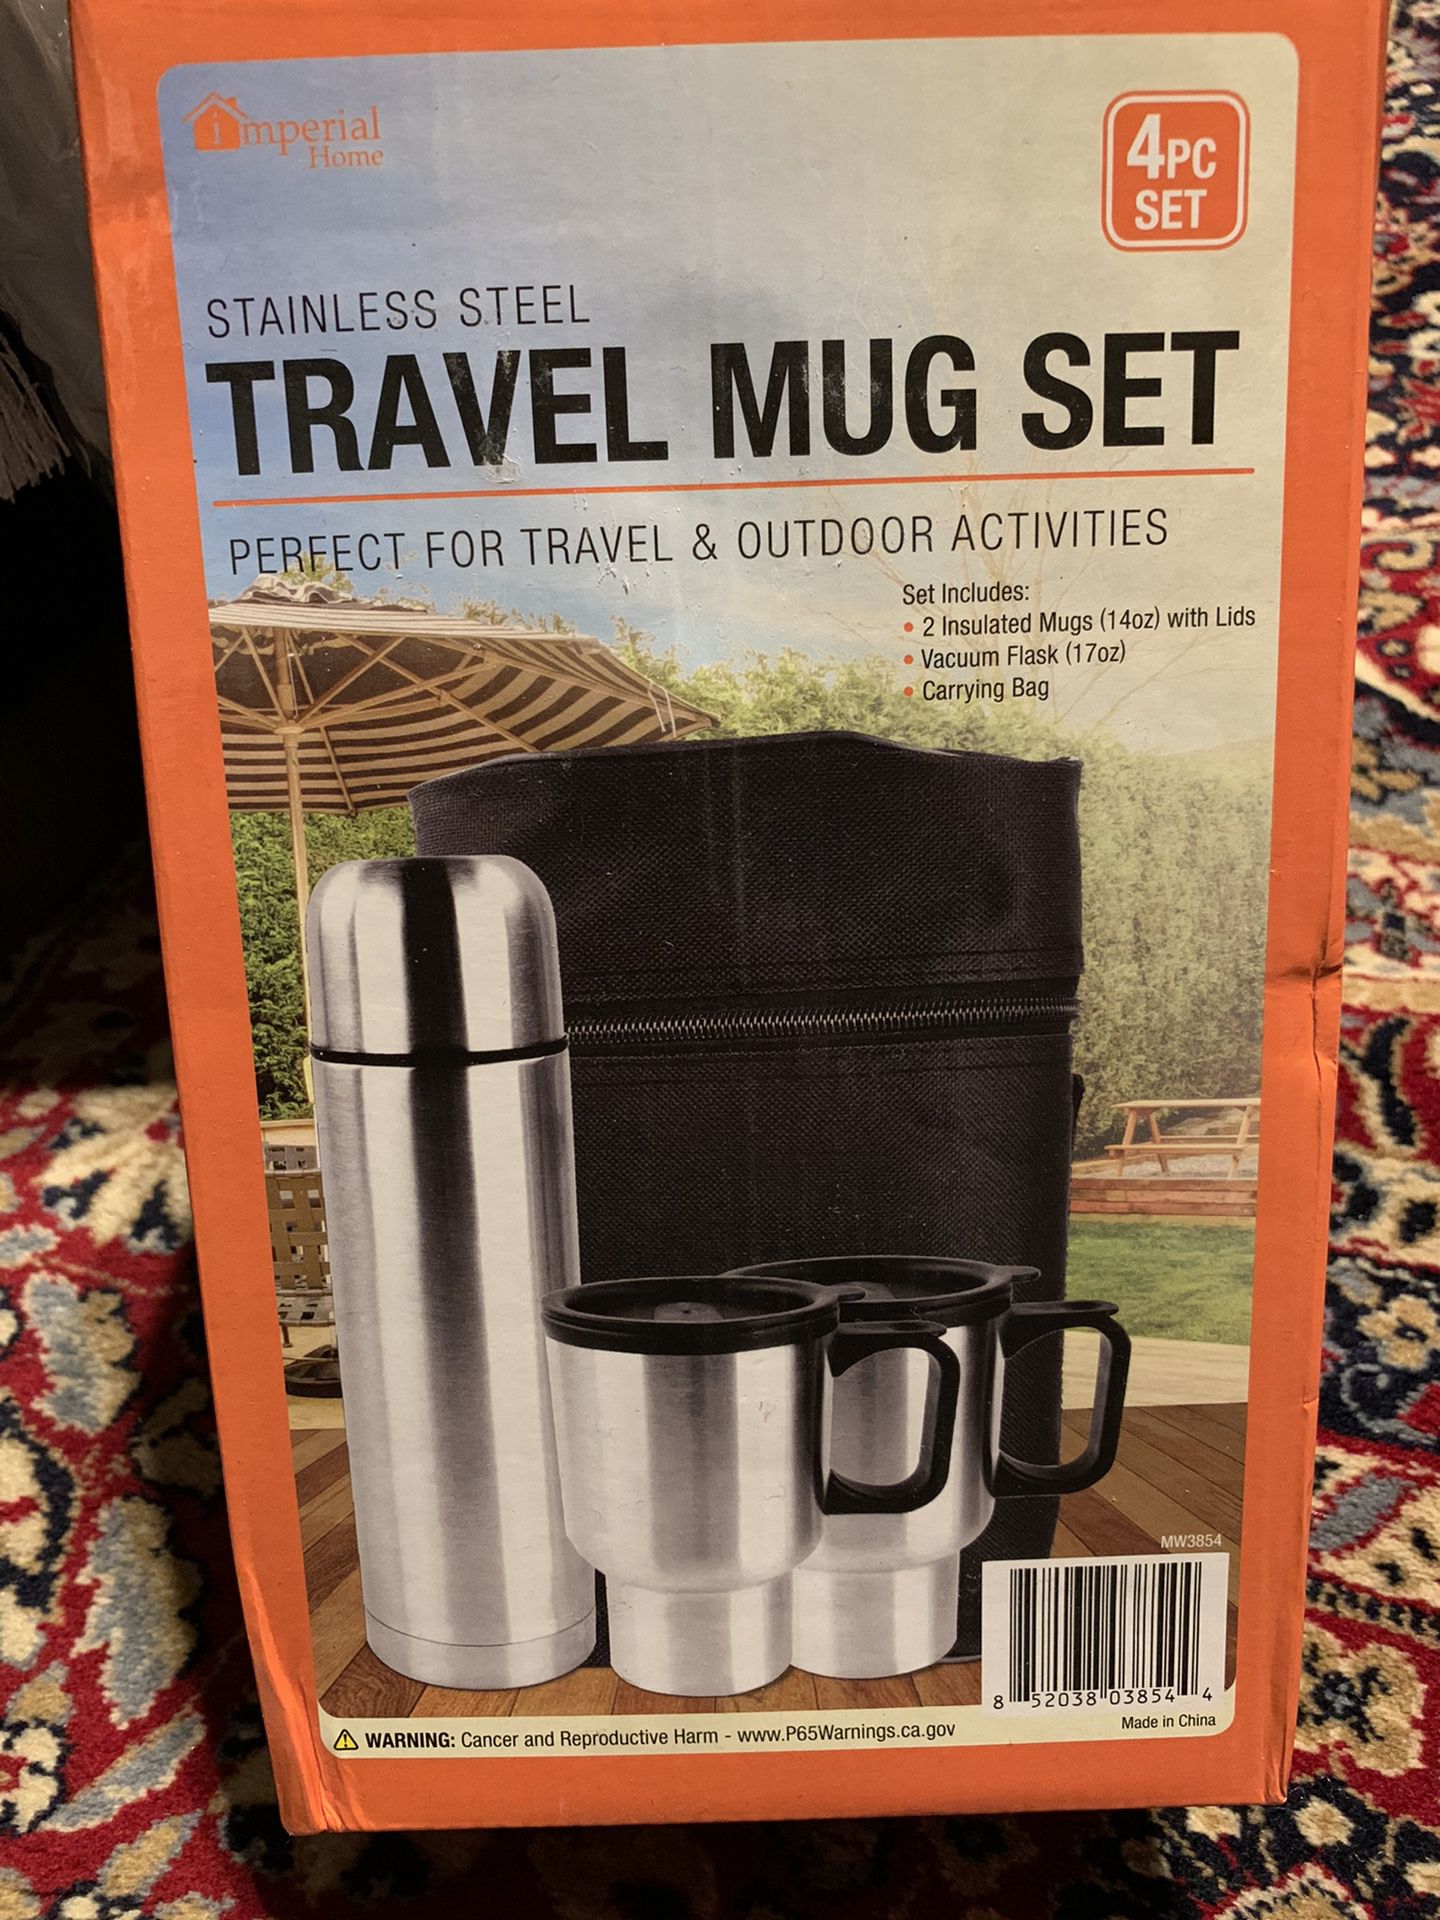 STAINLESS STEEL TRAVEL MUG SET brand new in the box